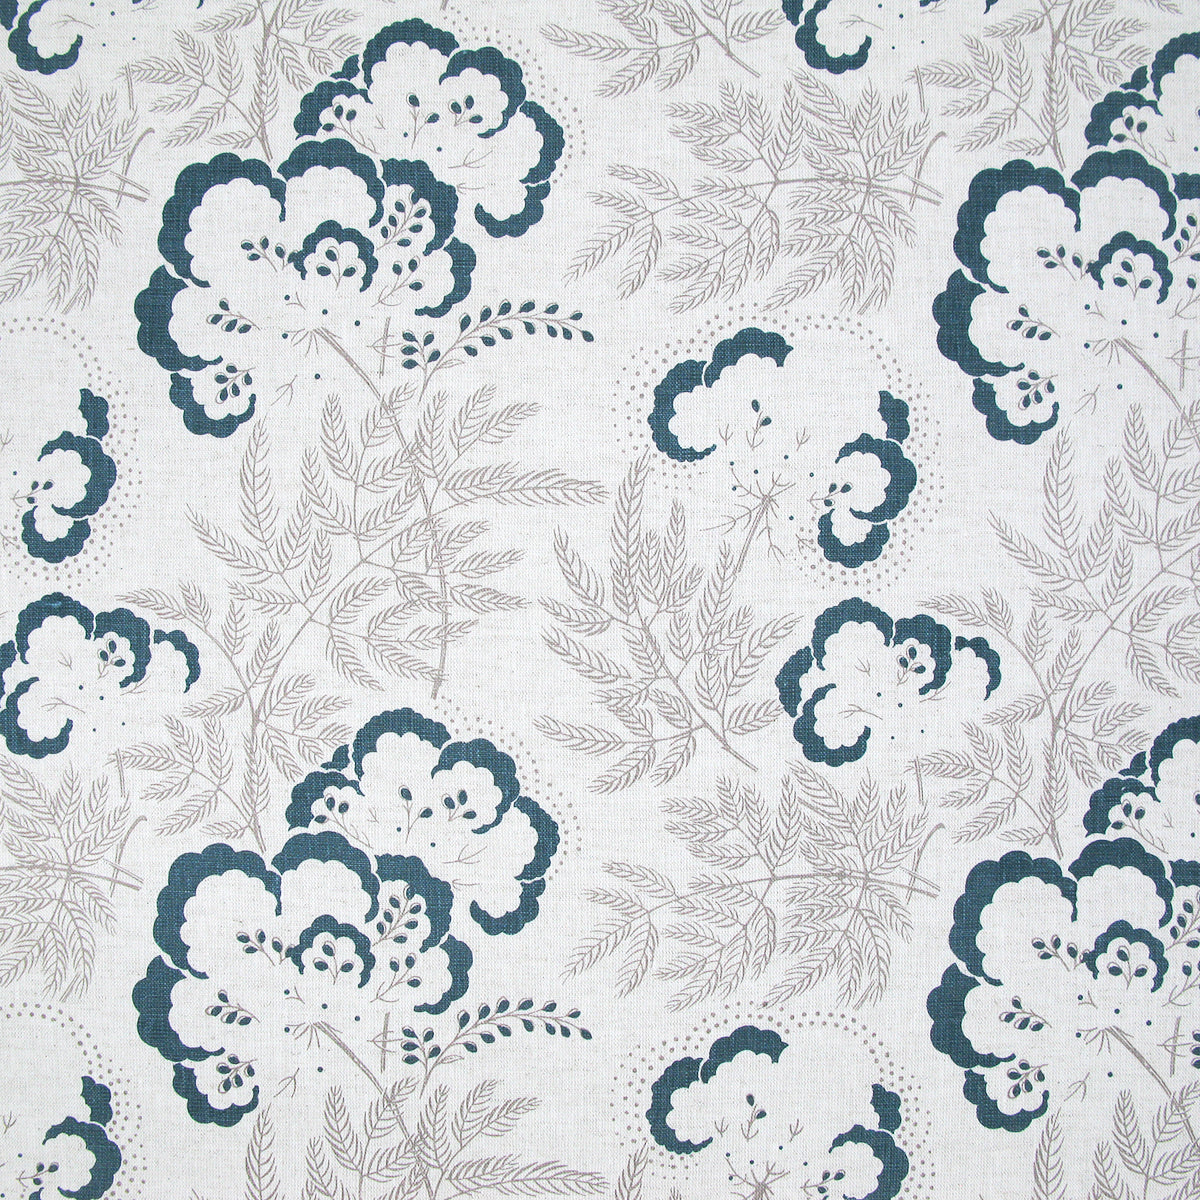 Detail of fabric in an intricate floral print in navy and gray on a white field.